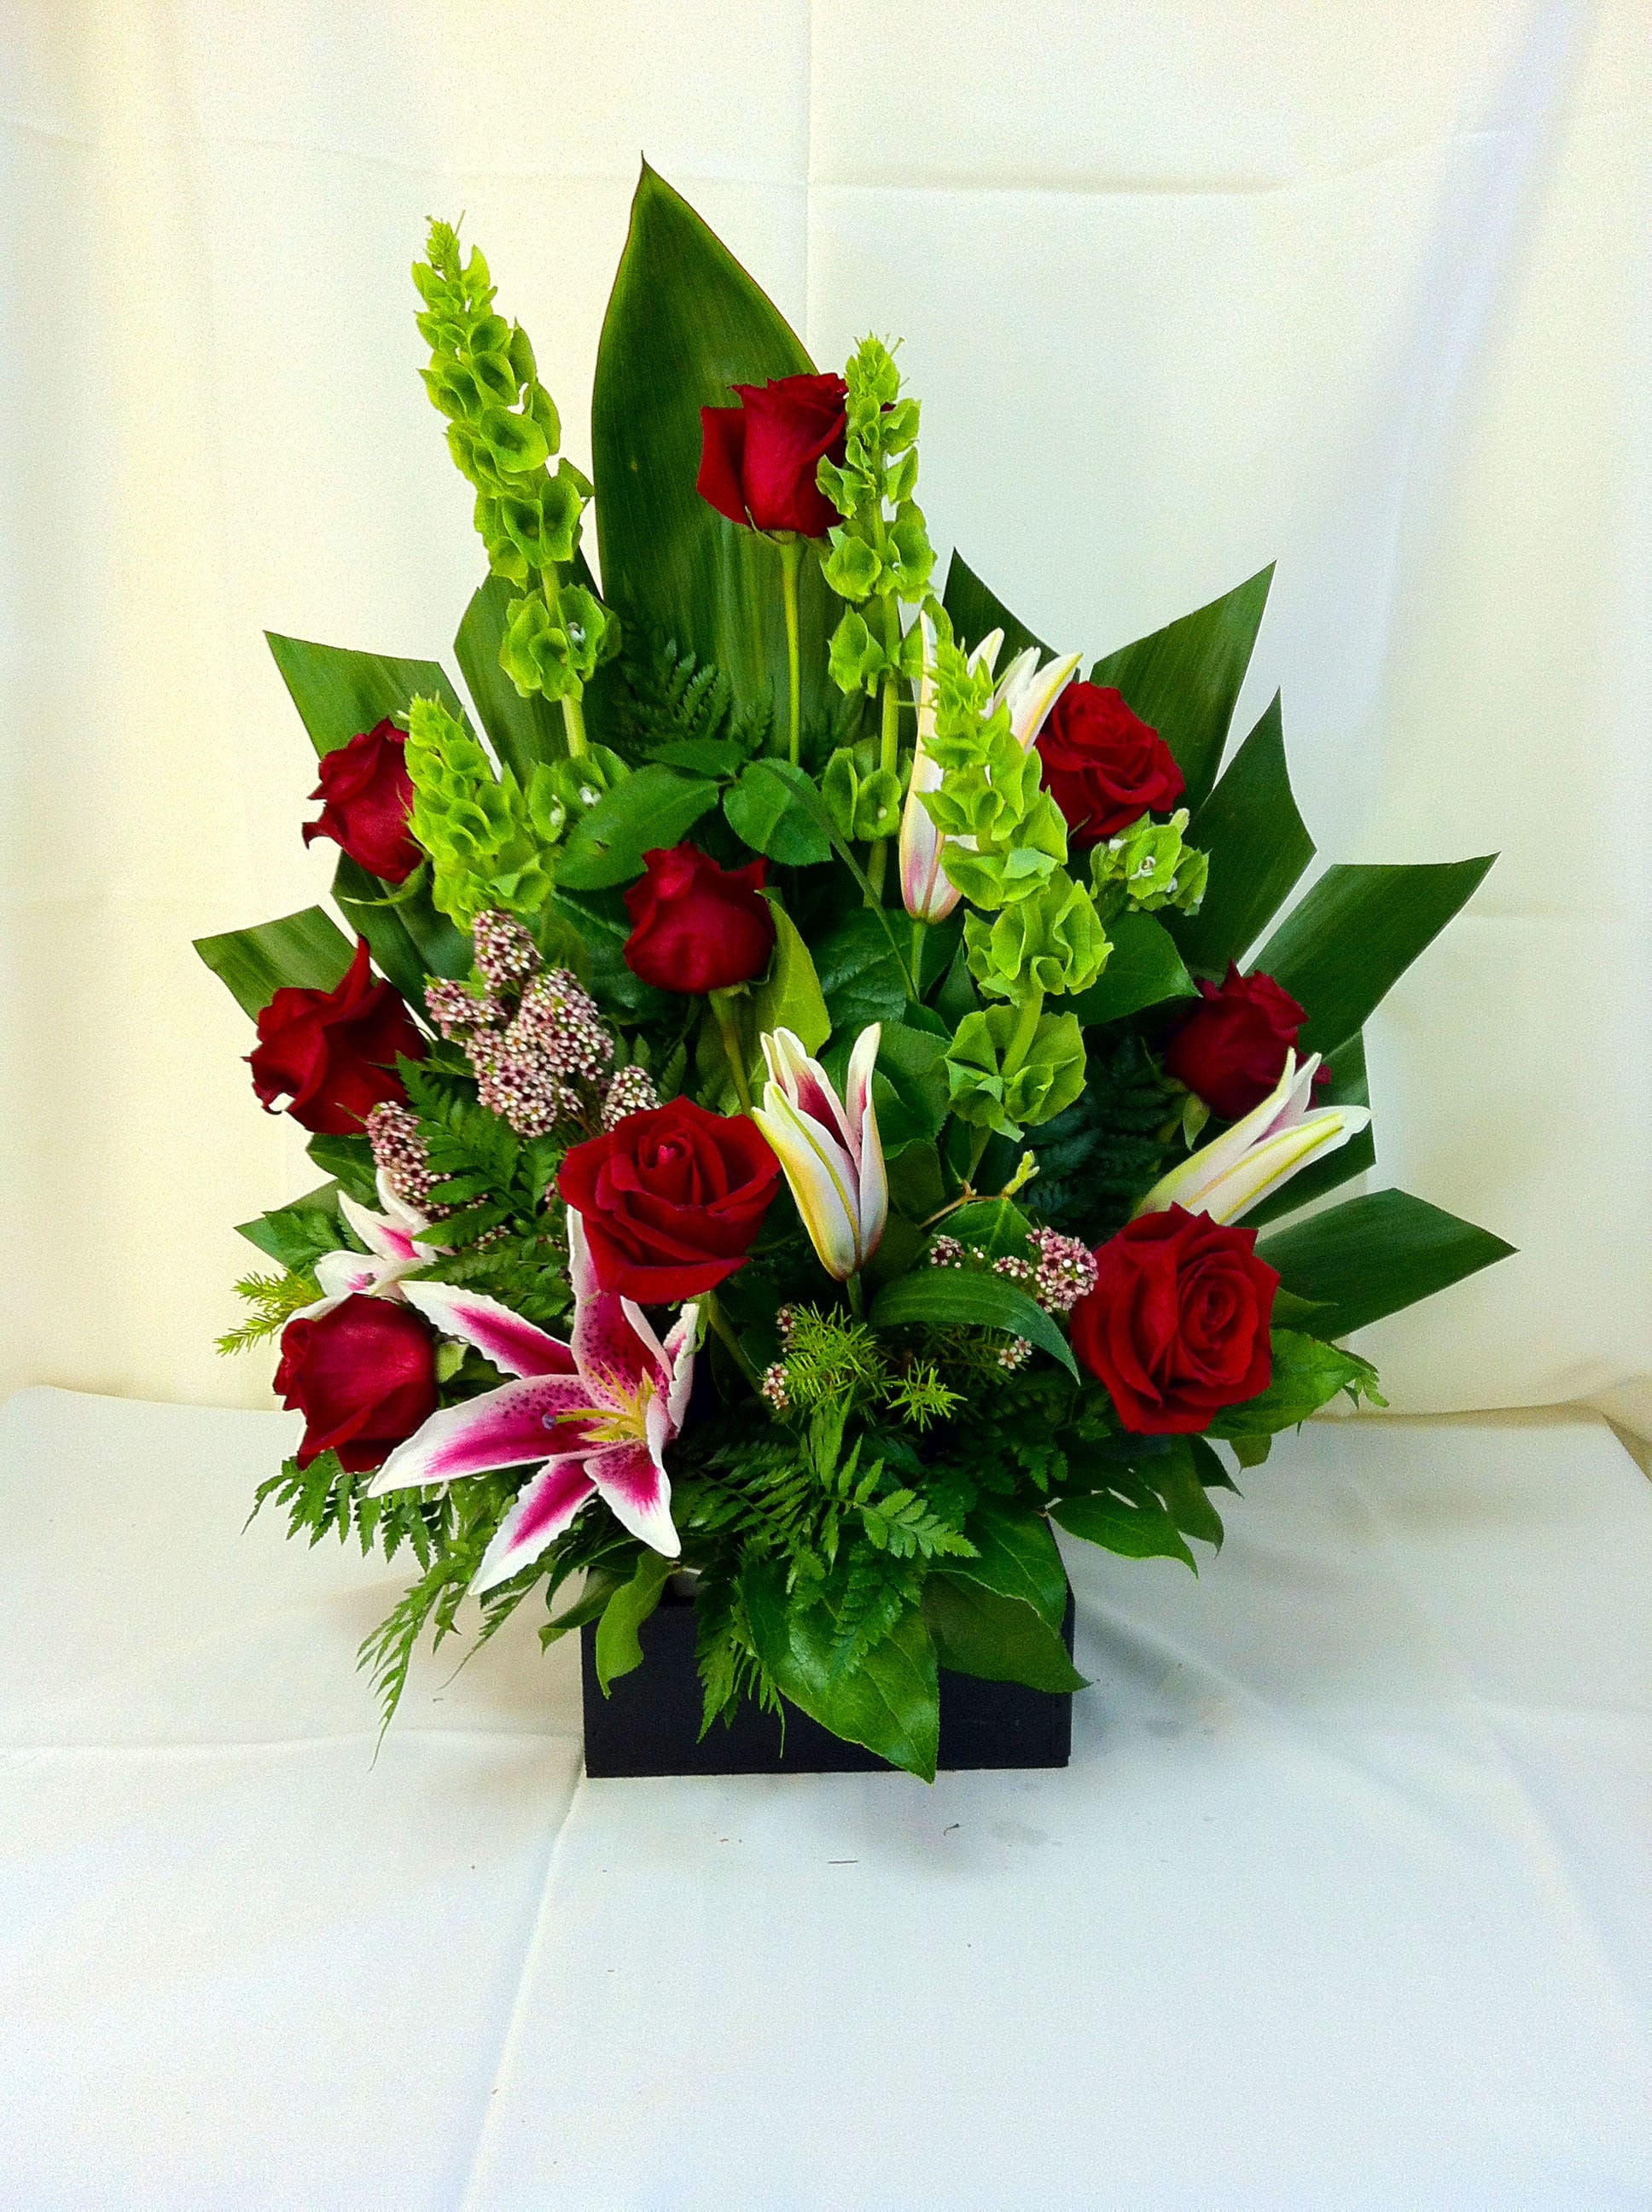 Irish Reds - Our freshest collection of 'Stargazer' lilies, bells of Ireland, Red Roses and more. Simply heavenly!